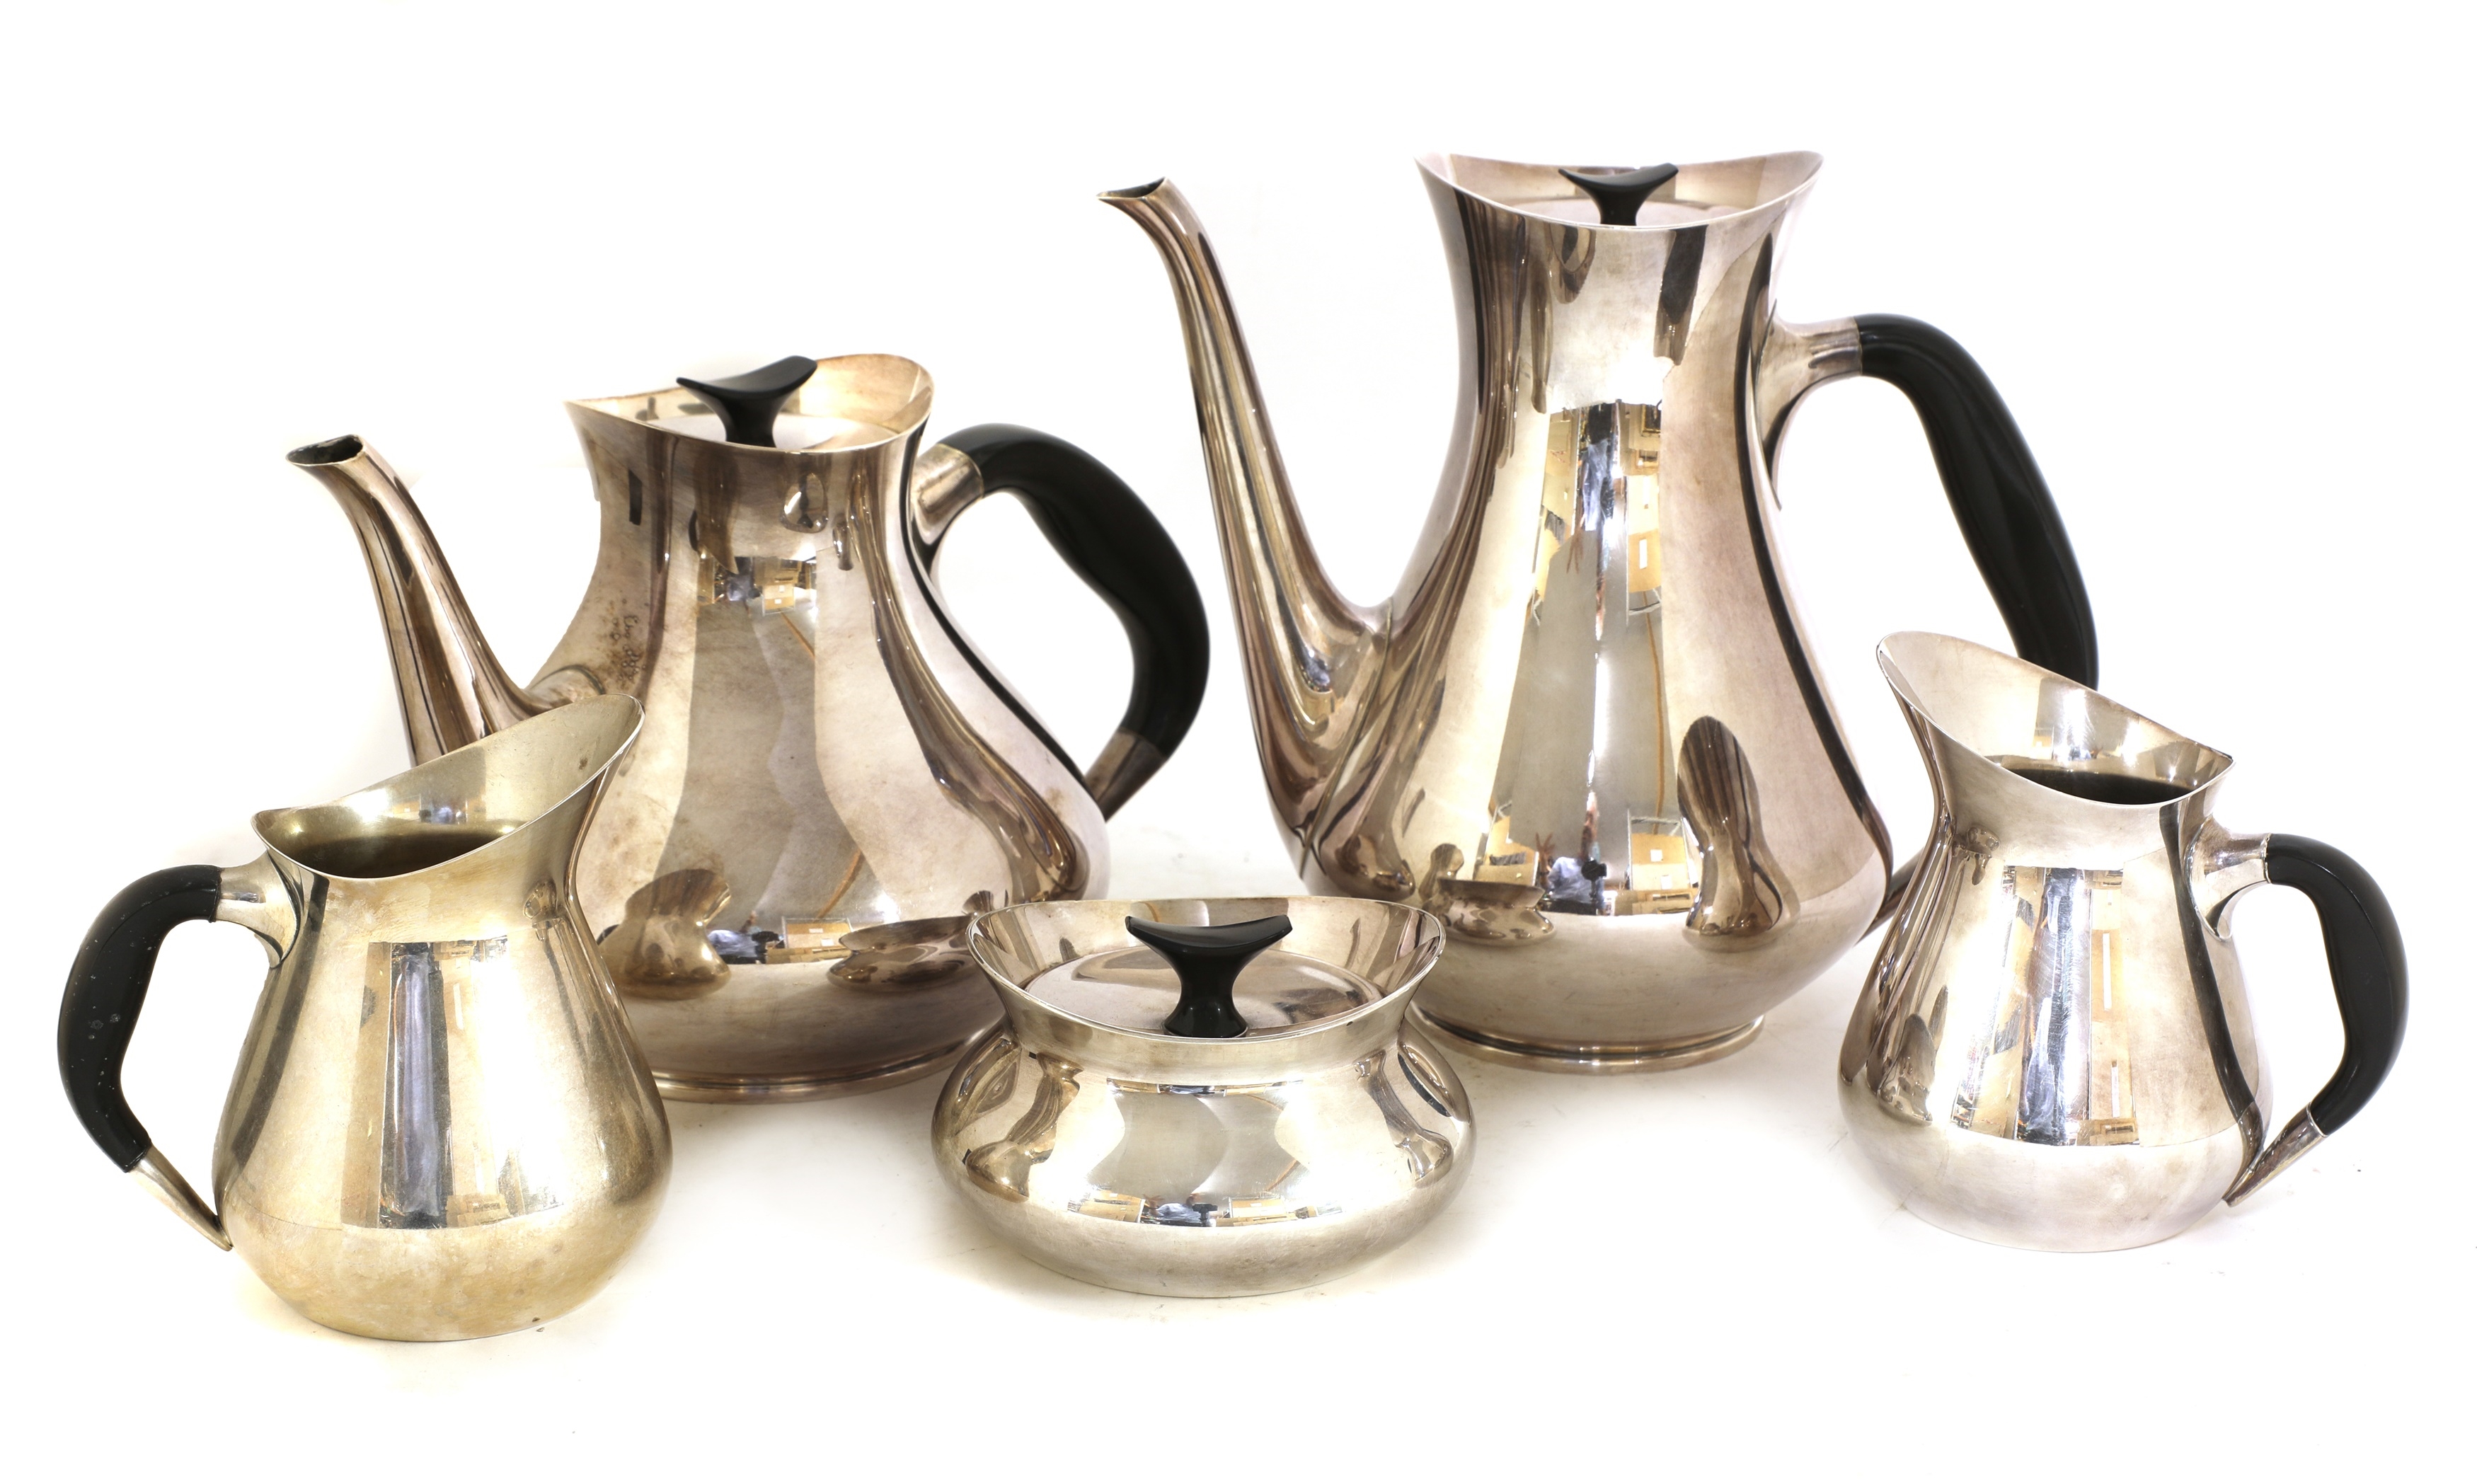 A Danish five-piece silver-plated tea and coffee set by Hans Bunde